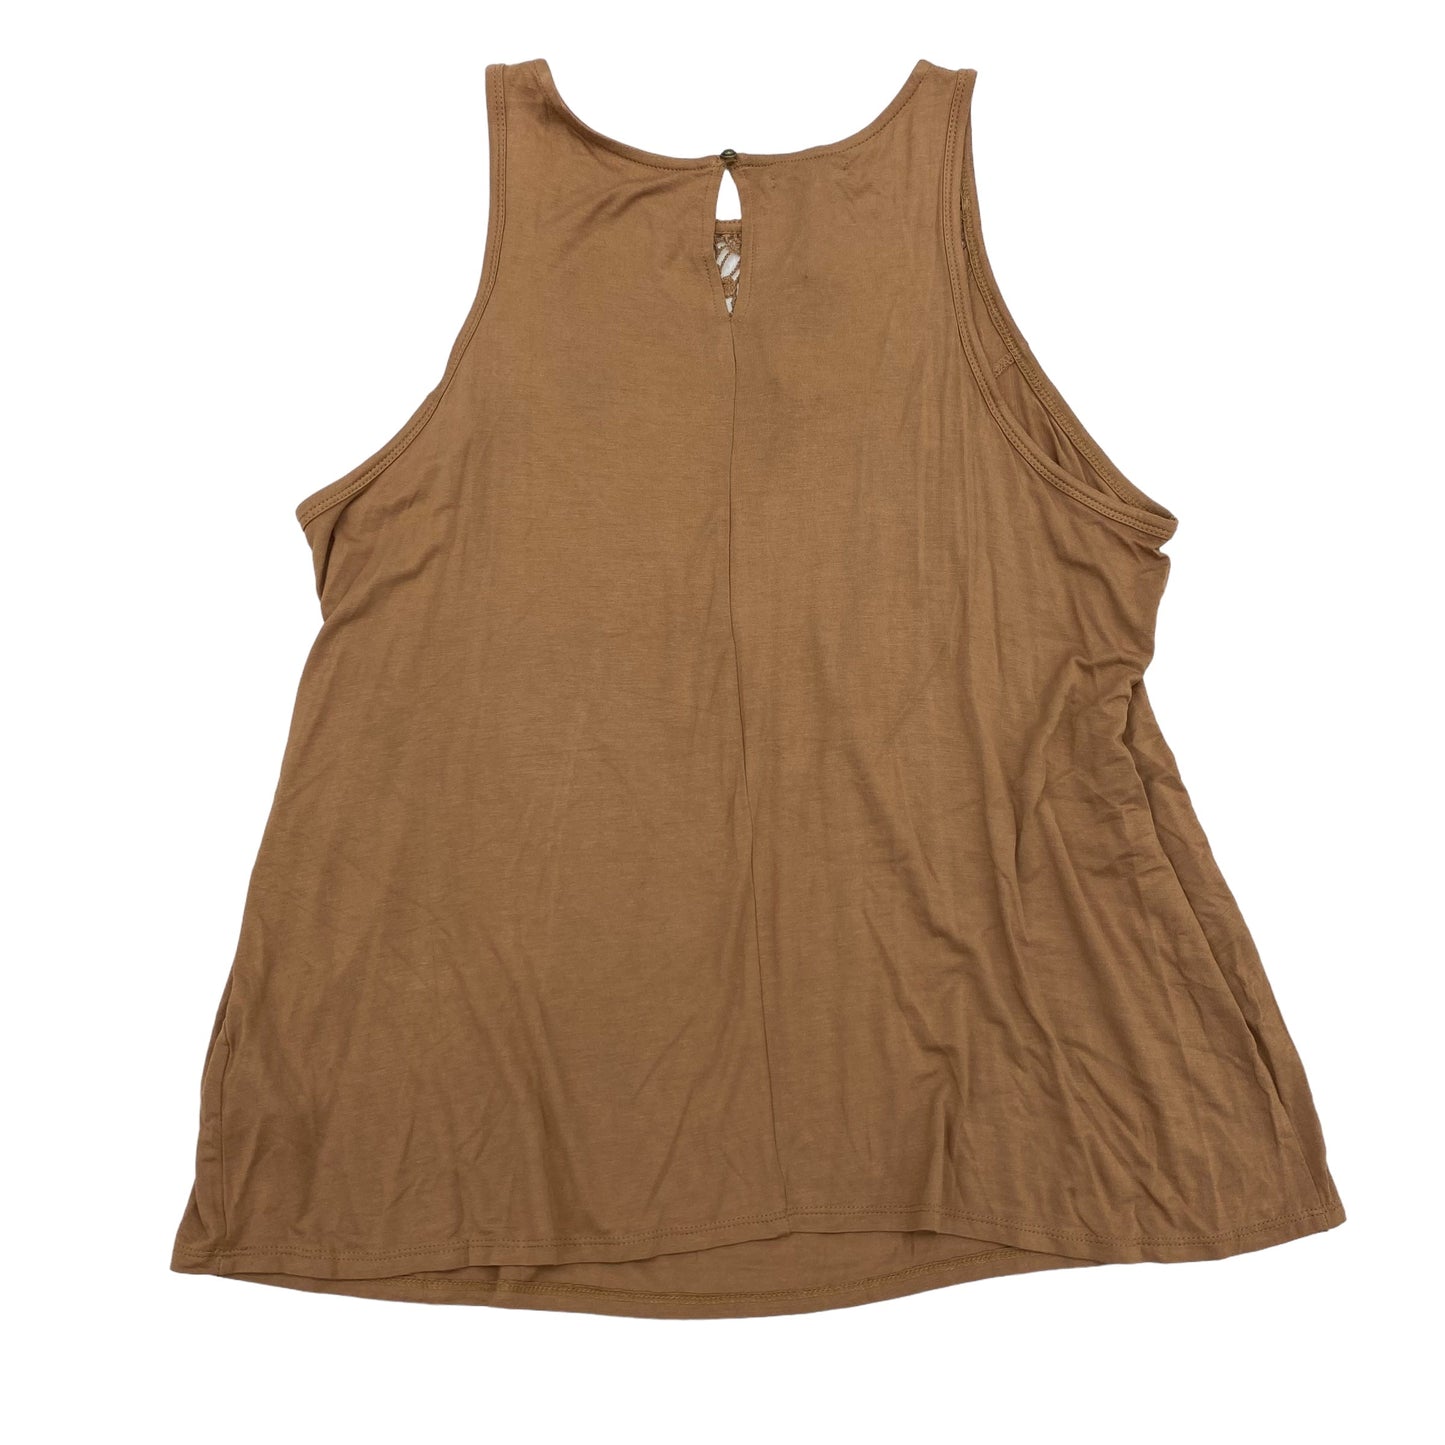 Brown Top Sleeveless Maurices, Size 2x